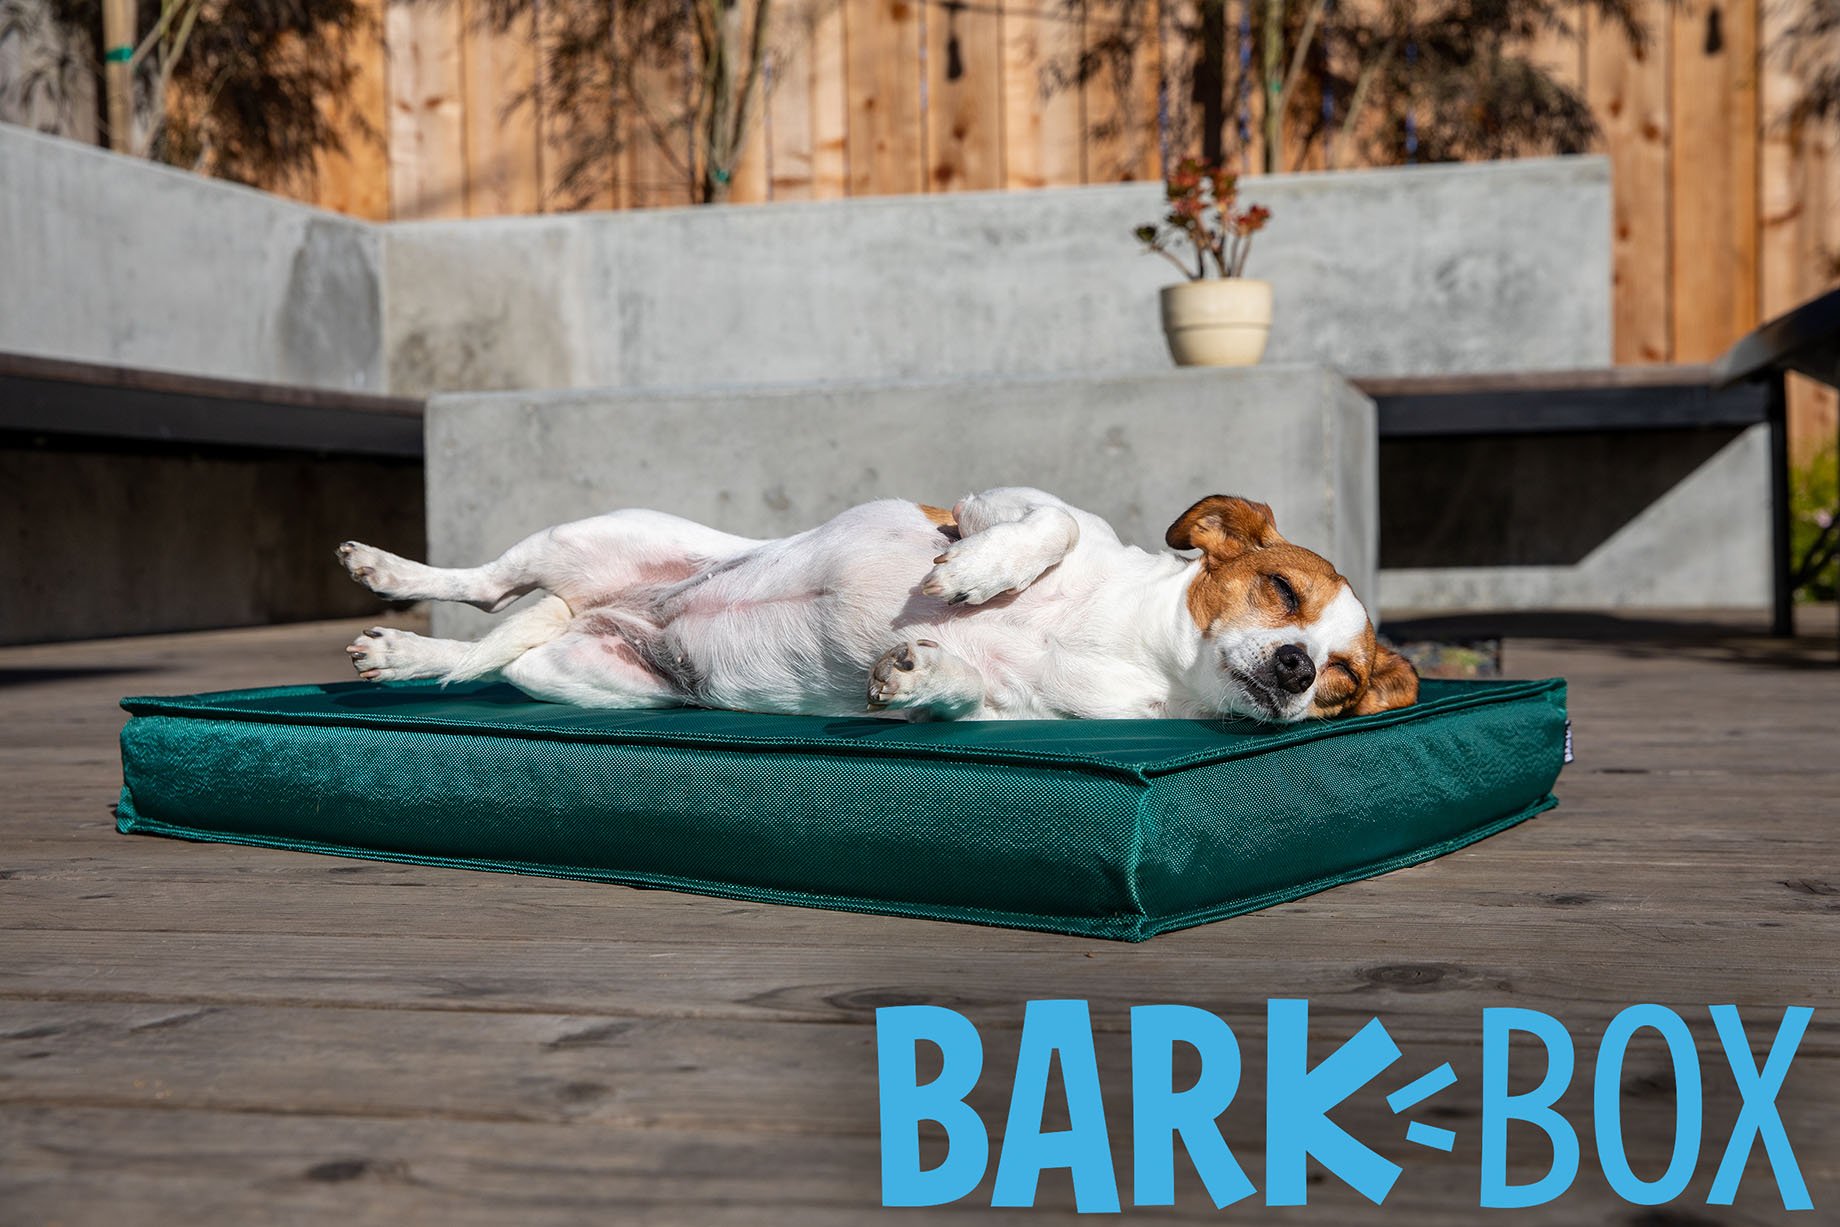 Small dog sleeping in the sun on BarkBox outdoor dog bed shot by Mark Rogers